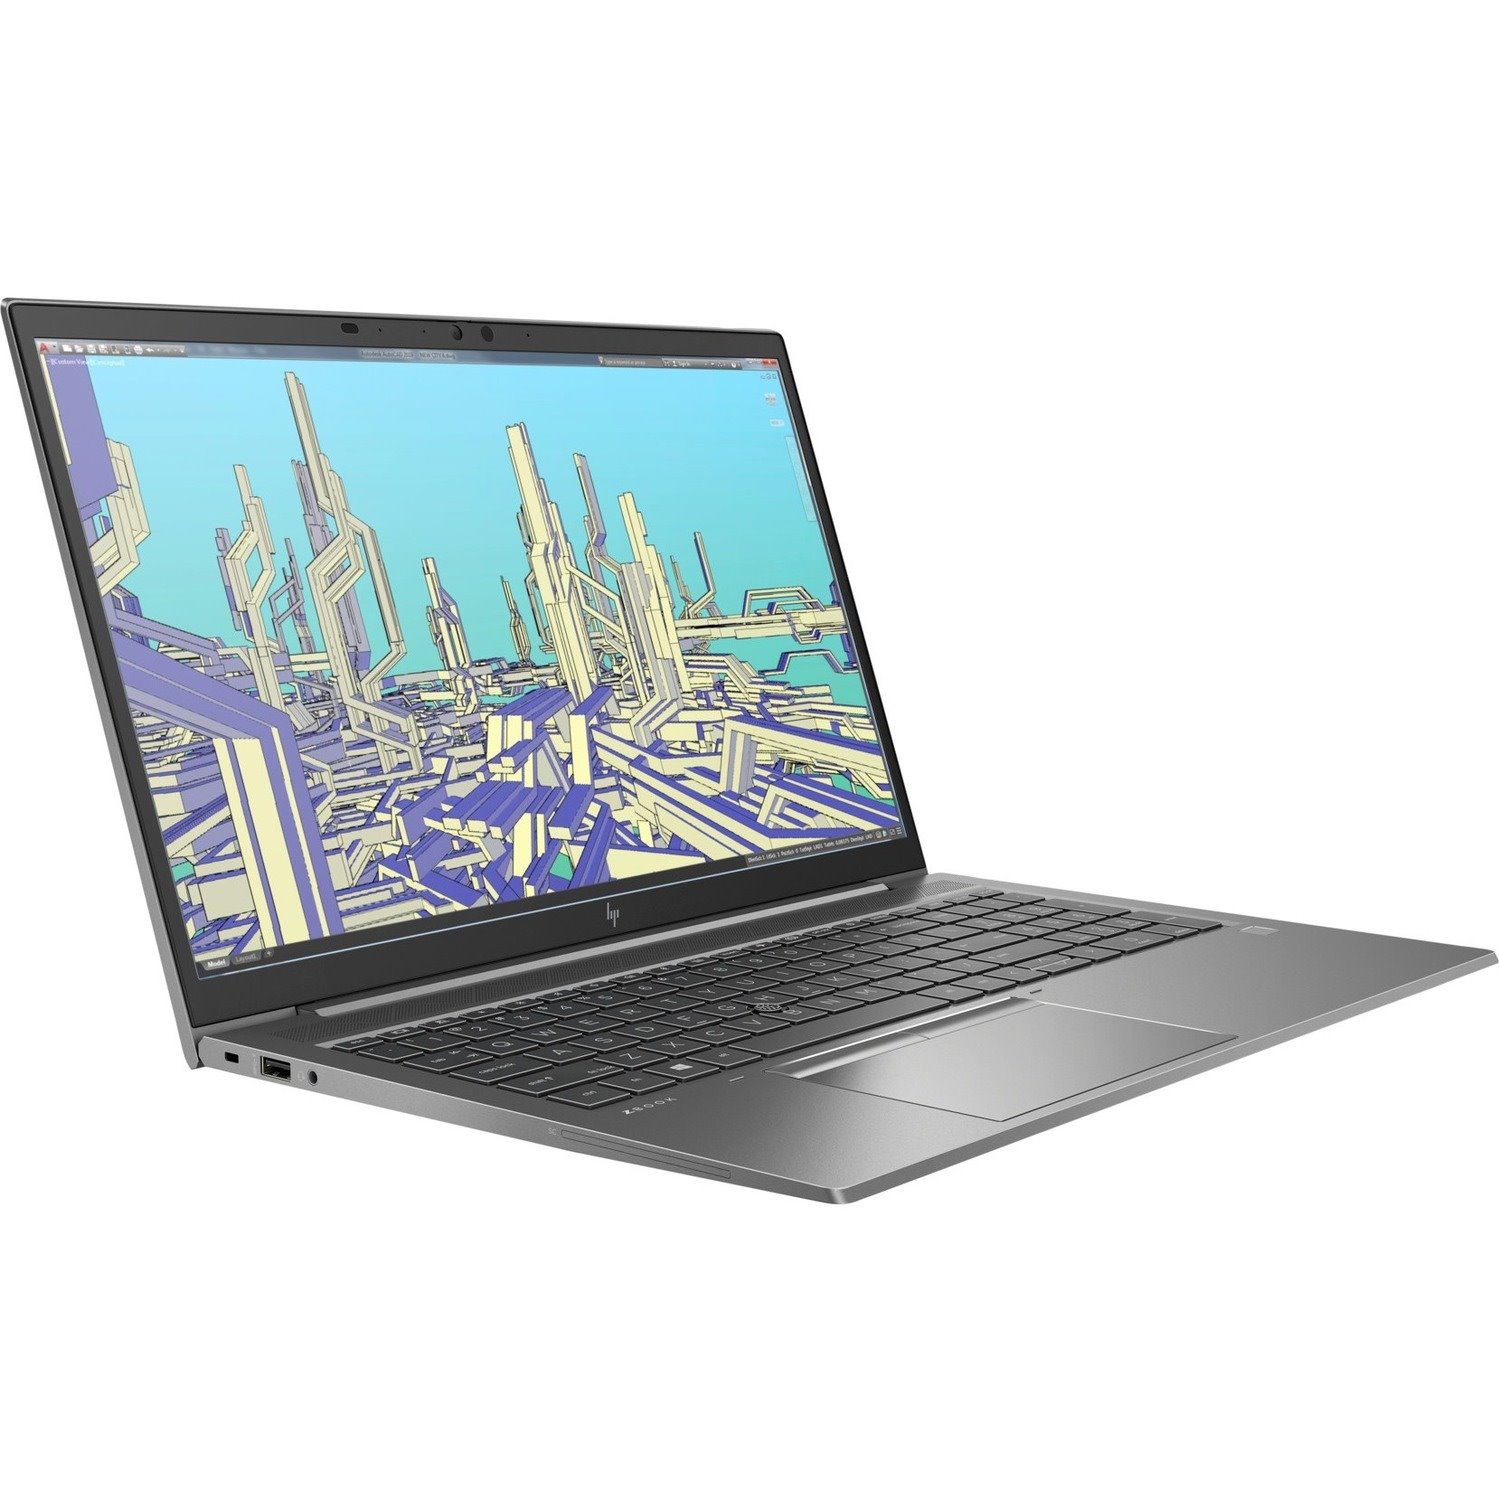 HP ZBook Firefly 15 G8 15.6" Mobile Workstation - Intel Core i7 11th Gen i7-1185G7 - 32 GB - 512 GB SSD - English, French Keyboard